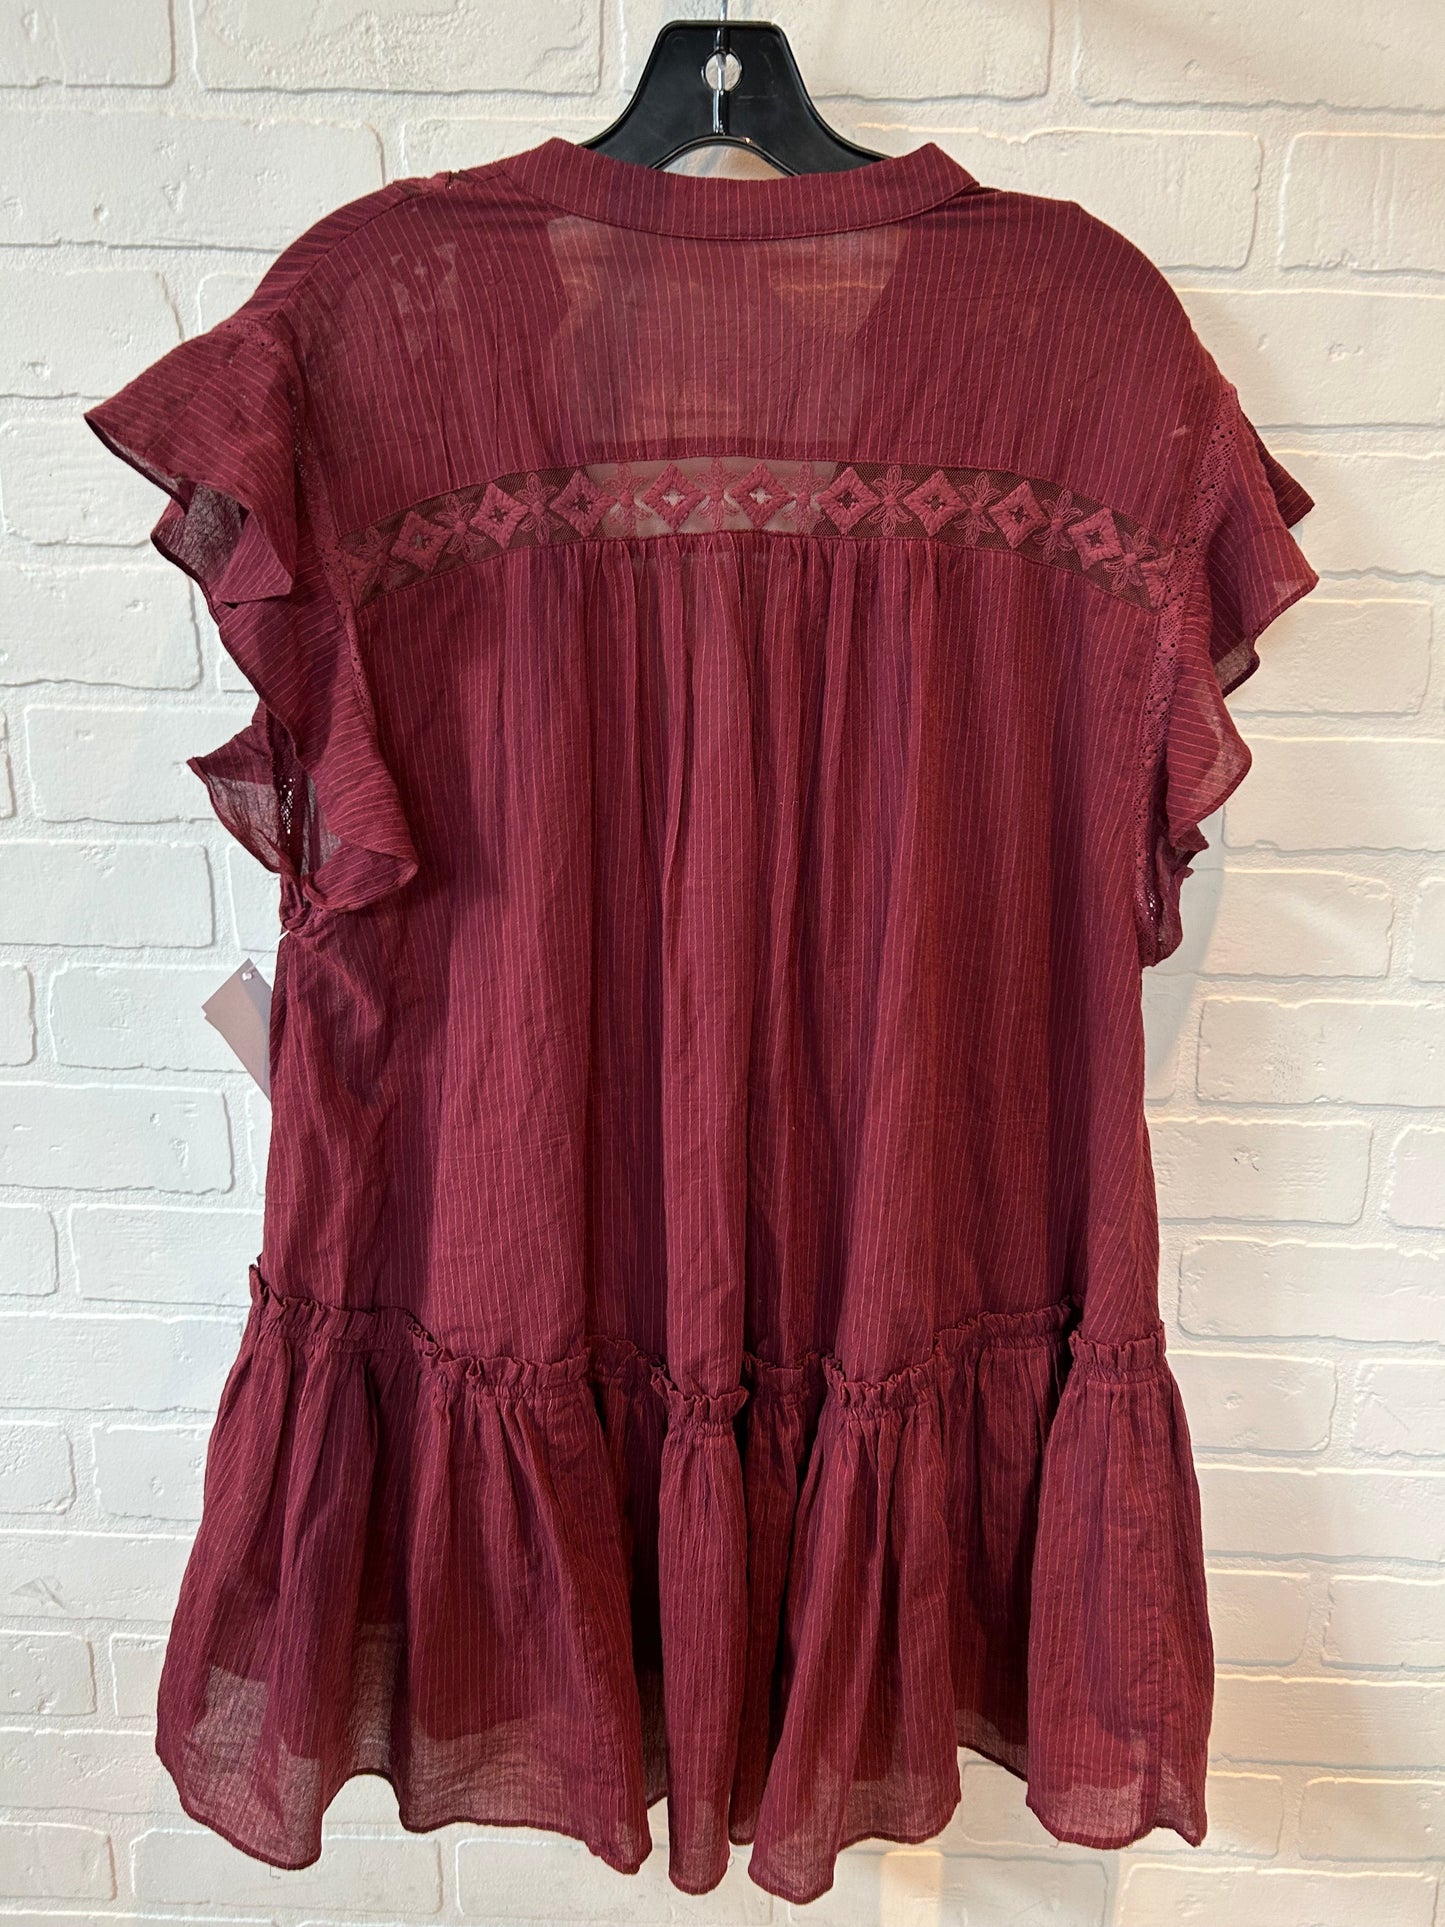 Red Tunic Short Sleeve Free People, Size S